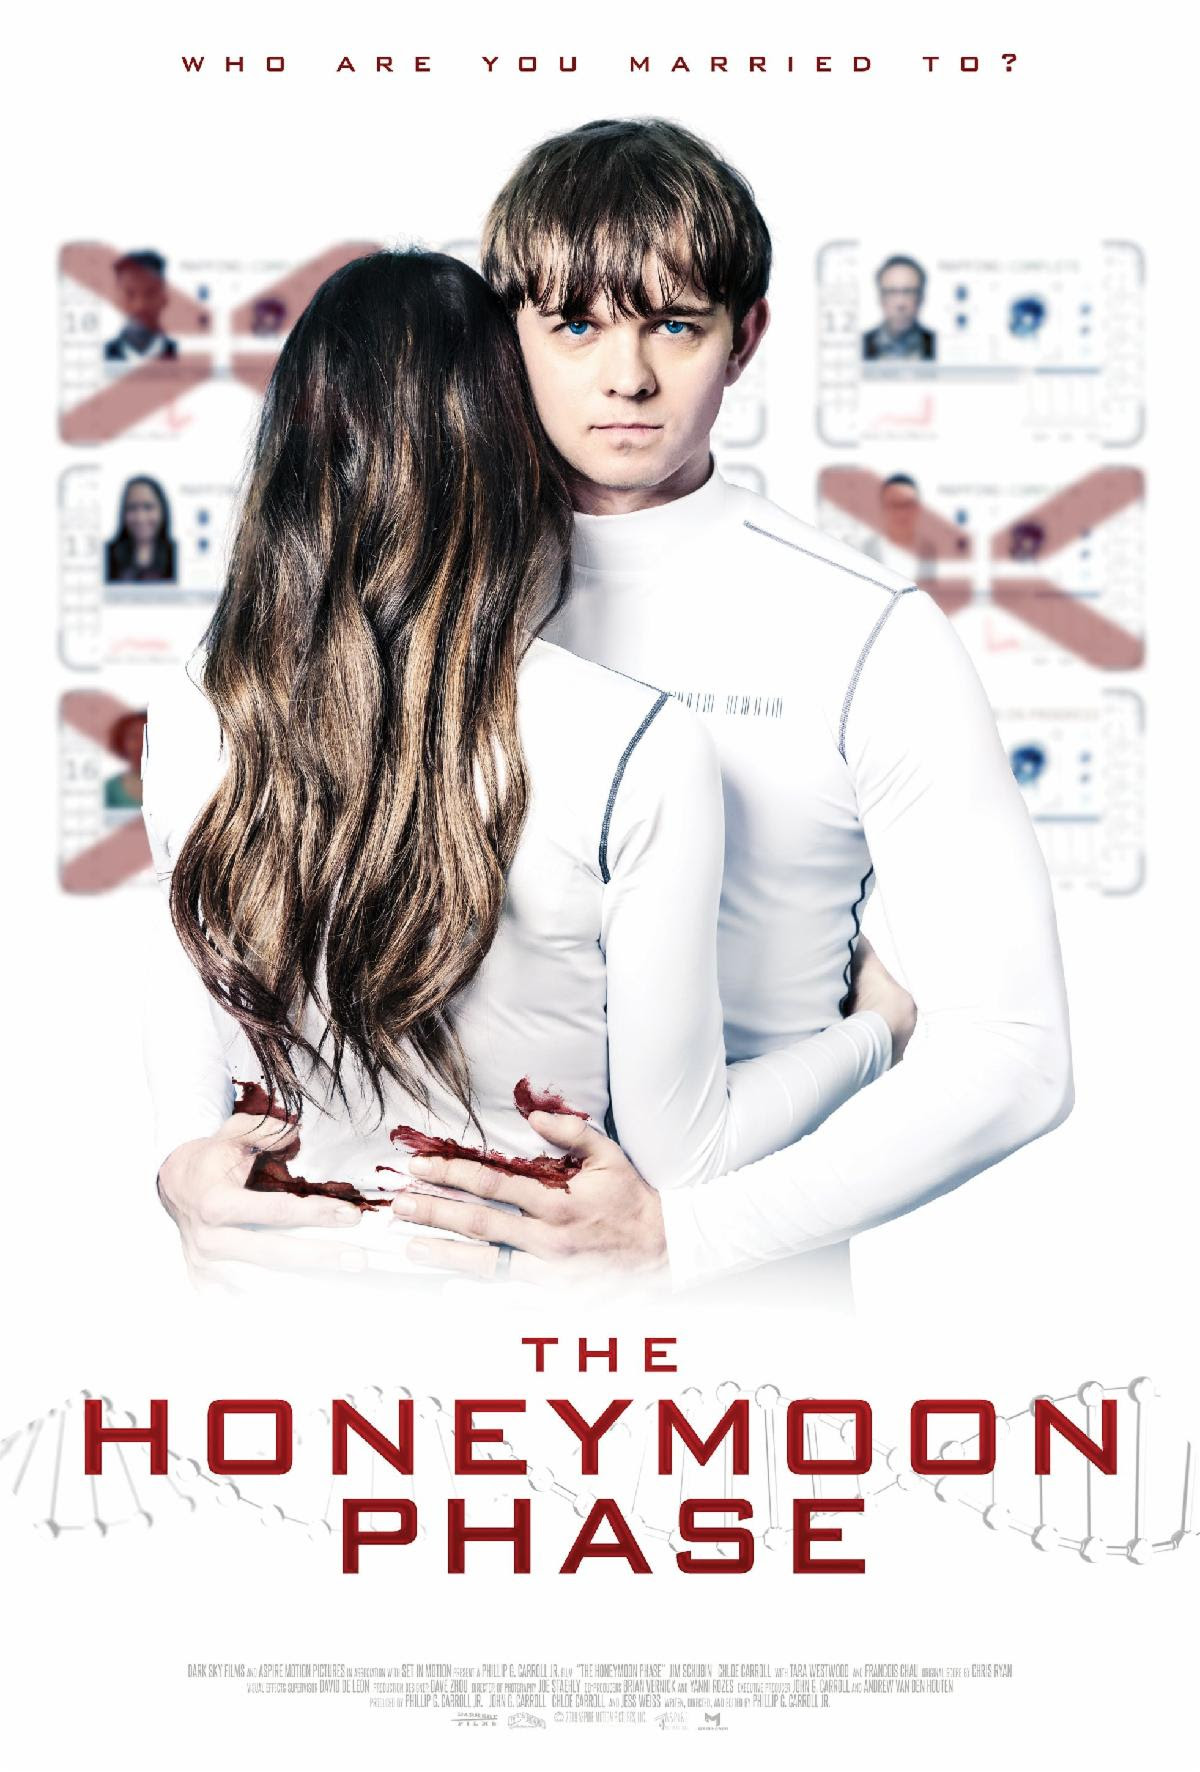 [Movie Review] THE HONEYMOON PHASE